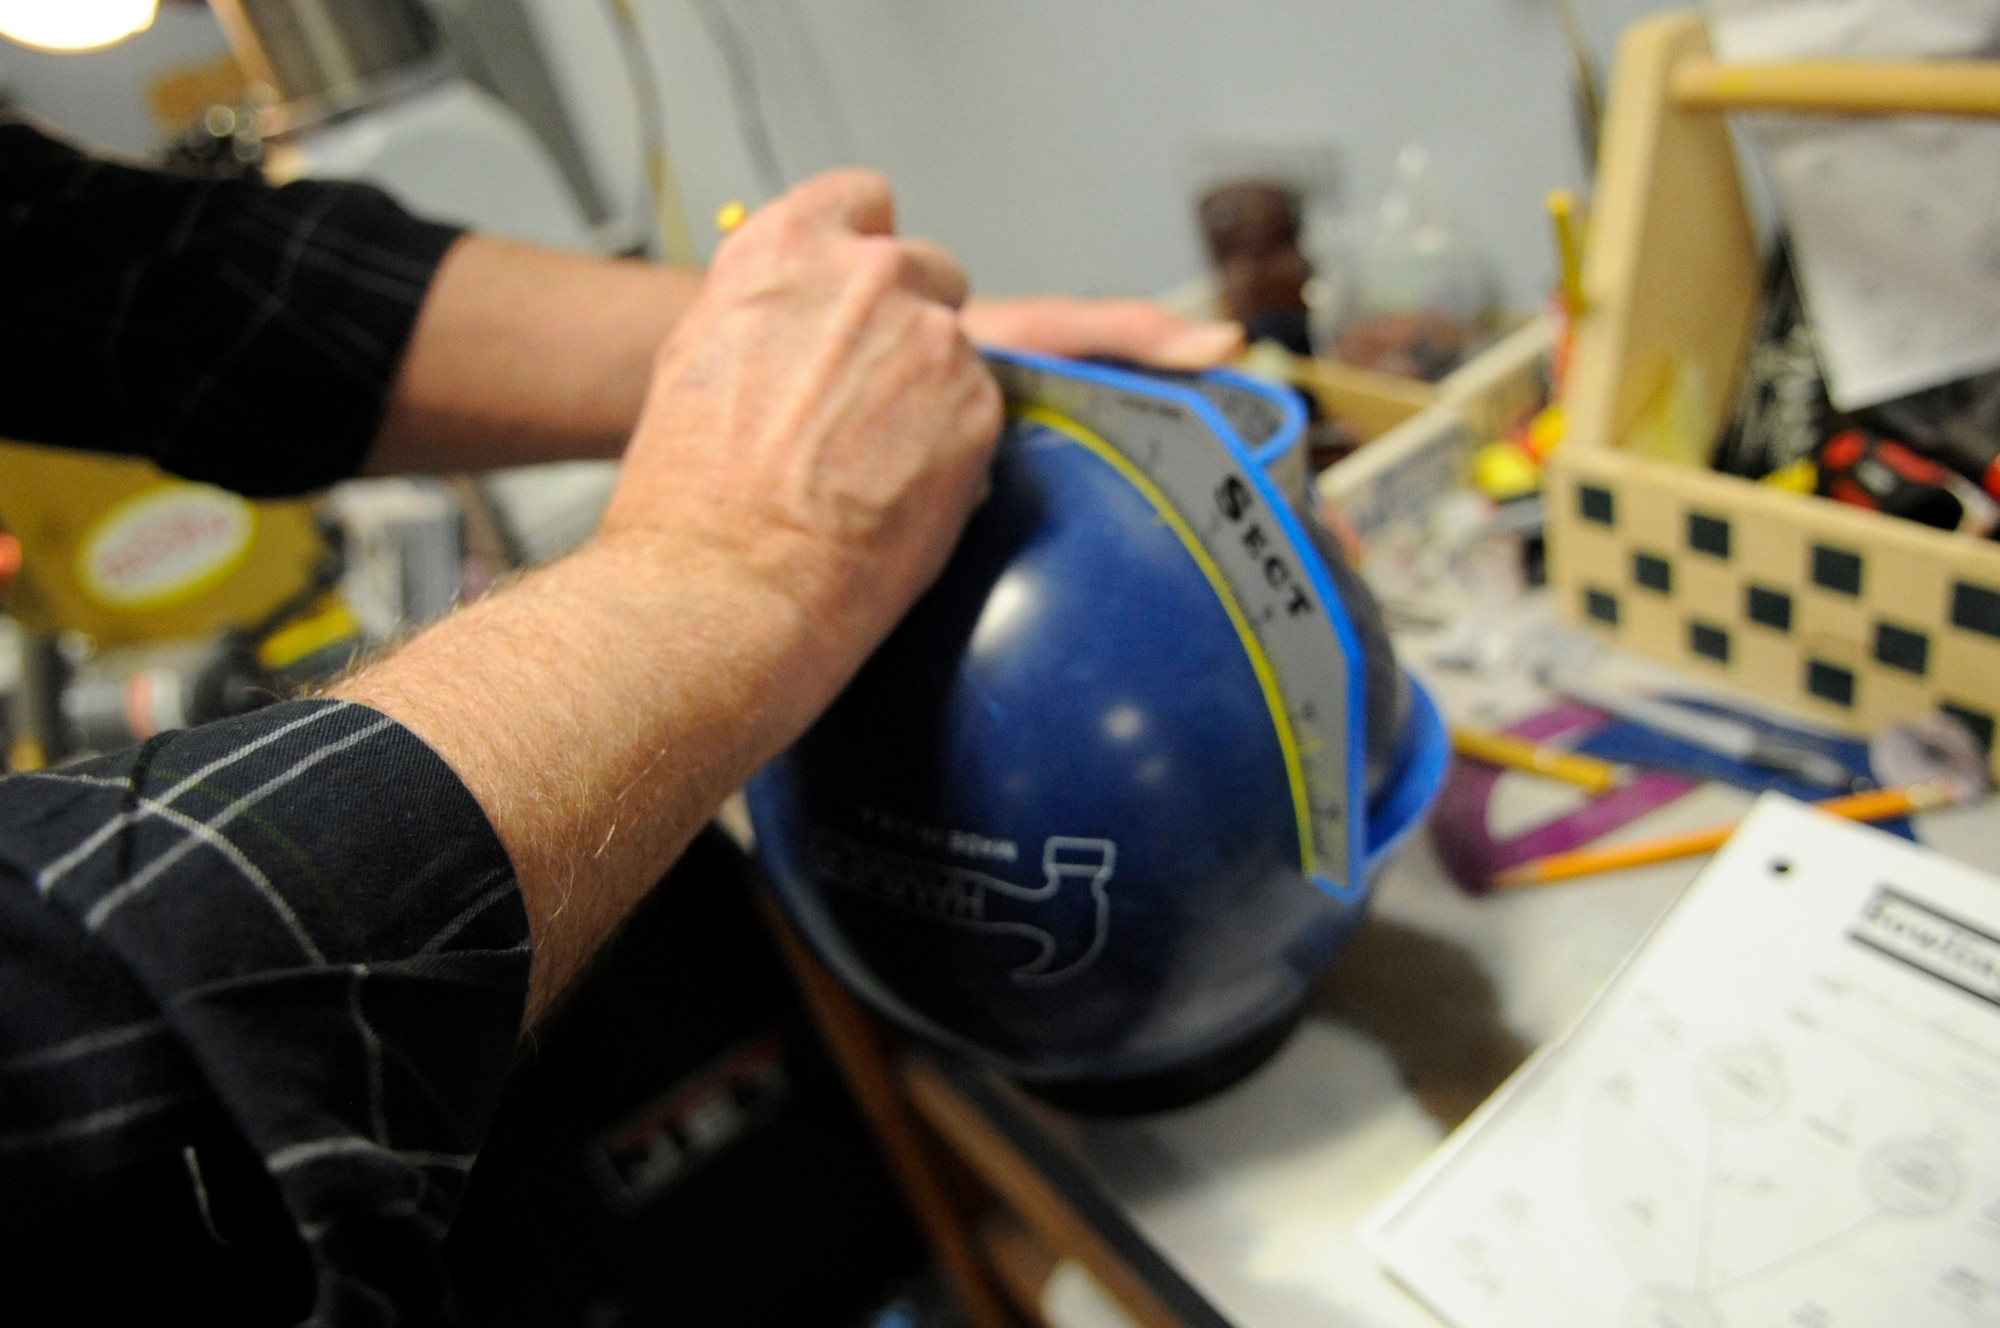 Bobby Choate, Barksdale Bowling Center manager, draws measurements onto a bowling ball before drilling finger holes at the bowling center on Barksdale Air Force Base, La., Feb. 22. The measurements are taken to ensure the owner's finger span fits the ball correctly. This can prevent tendon damage when bowling. (U.S. Air Force photo/Airman 1st Class Andrea F. Liechti)(RELEASED)